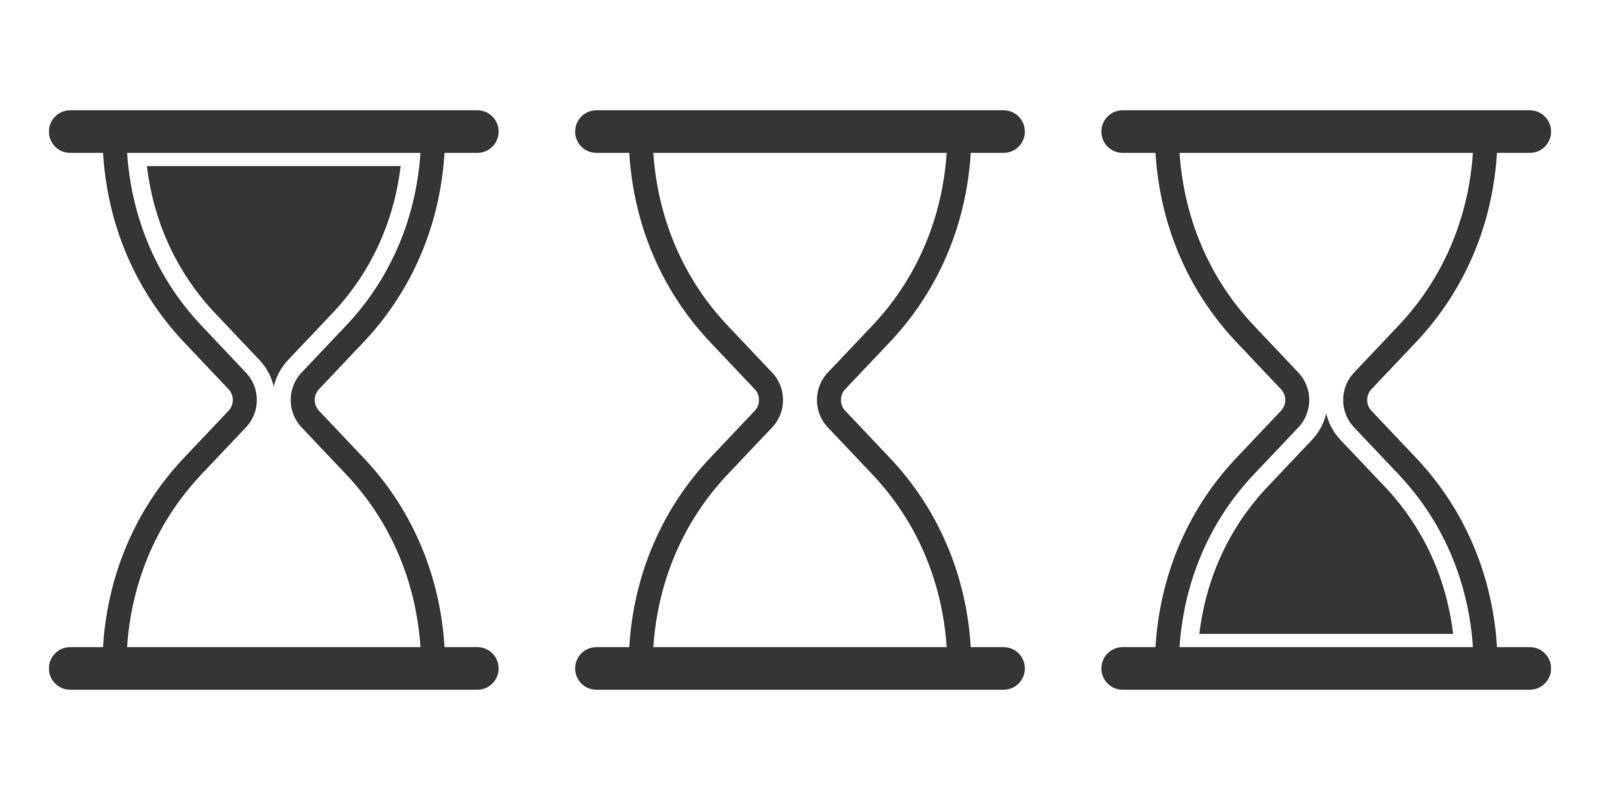 Set of sandglass icons isolated. Hourglass icon in flat style. Time or Clock concept. Vector illustration.